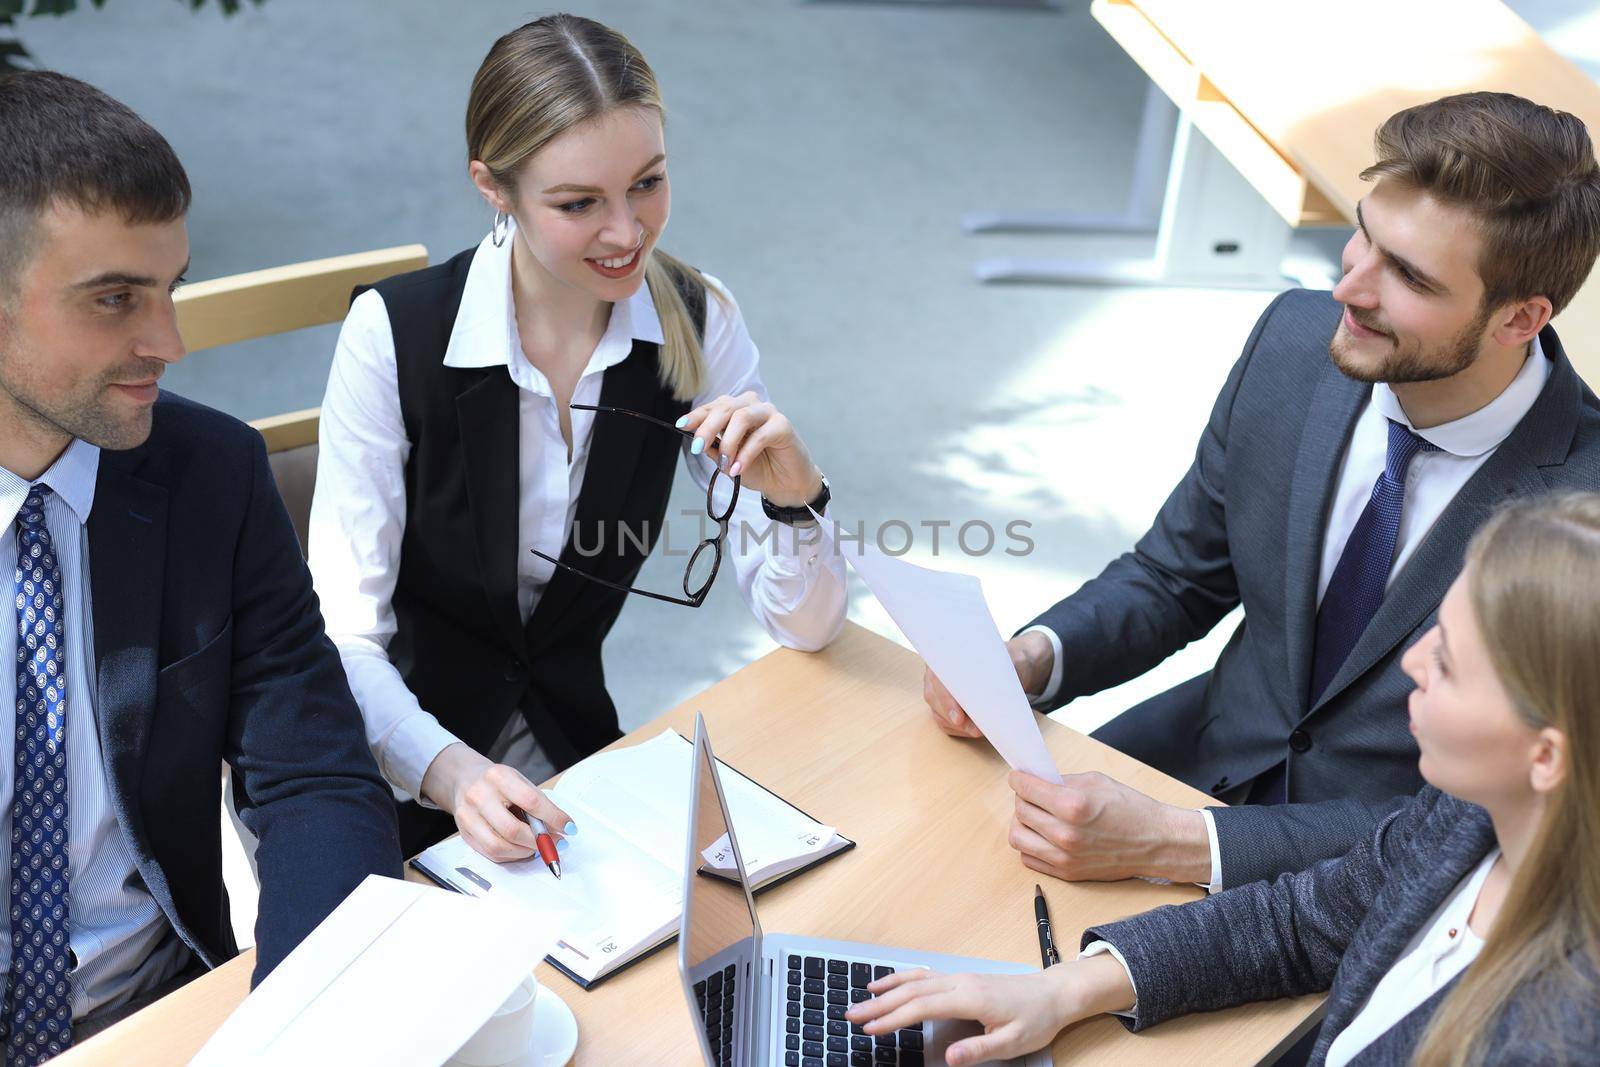 Image of business partners discussing documents and ideas at meeting